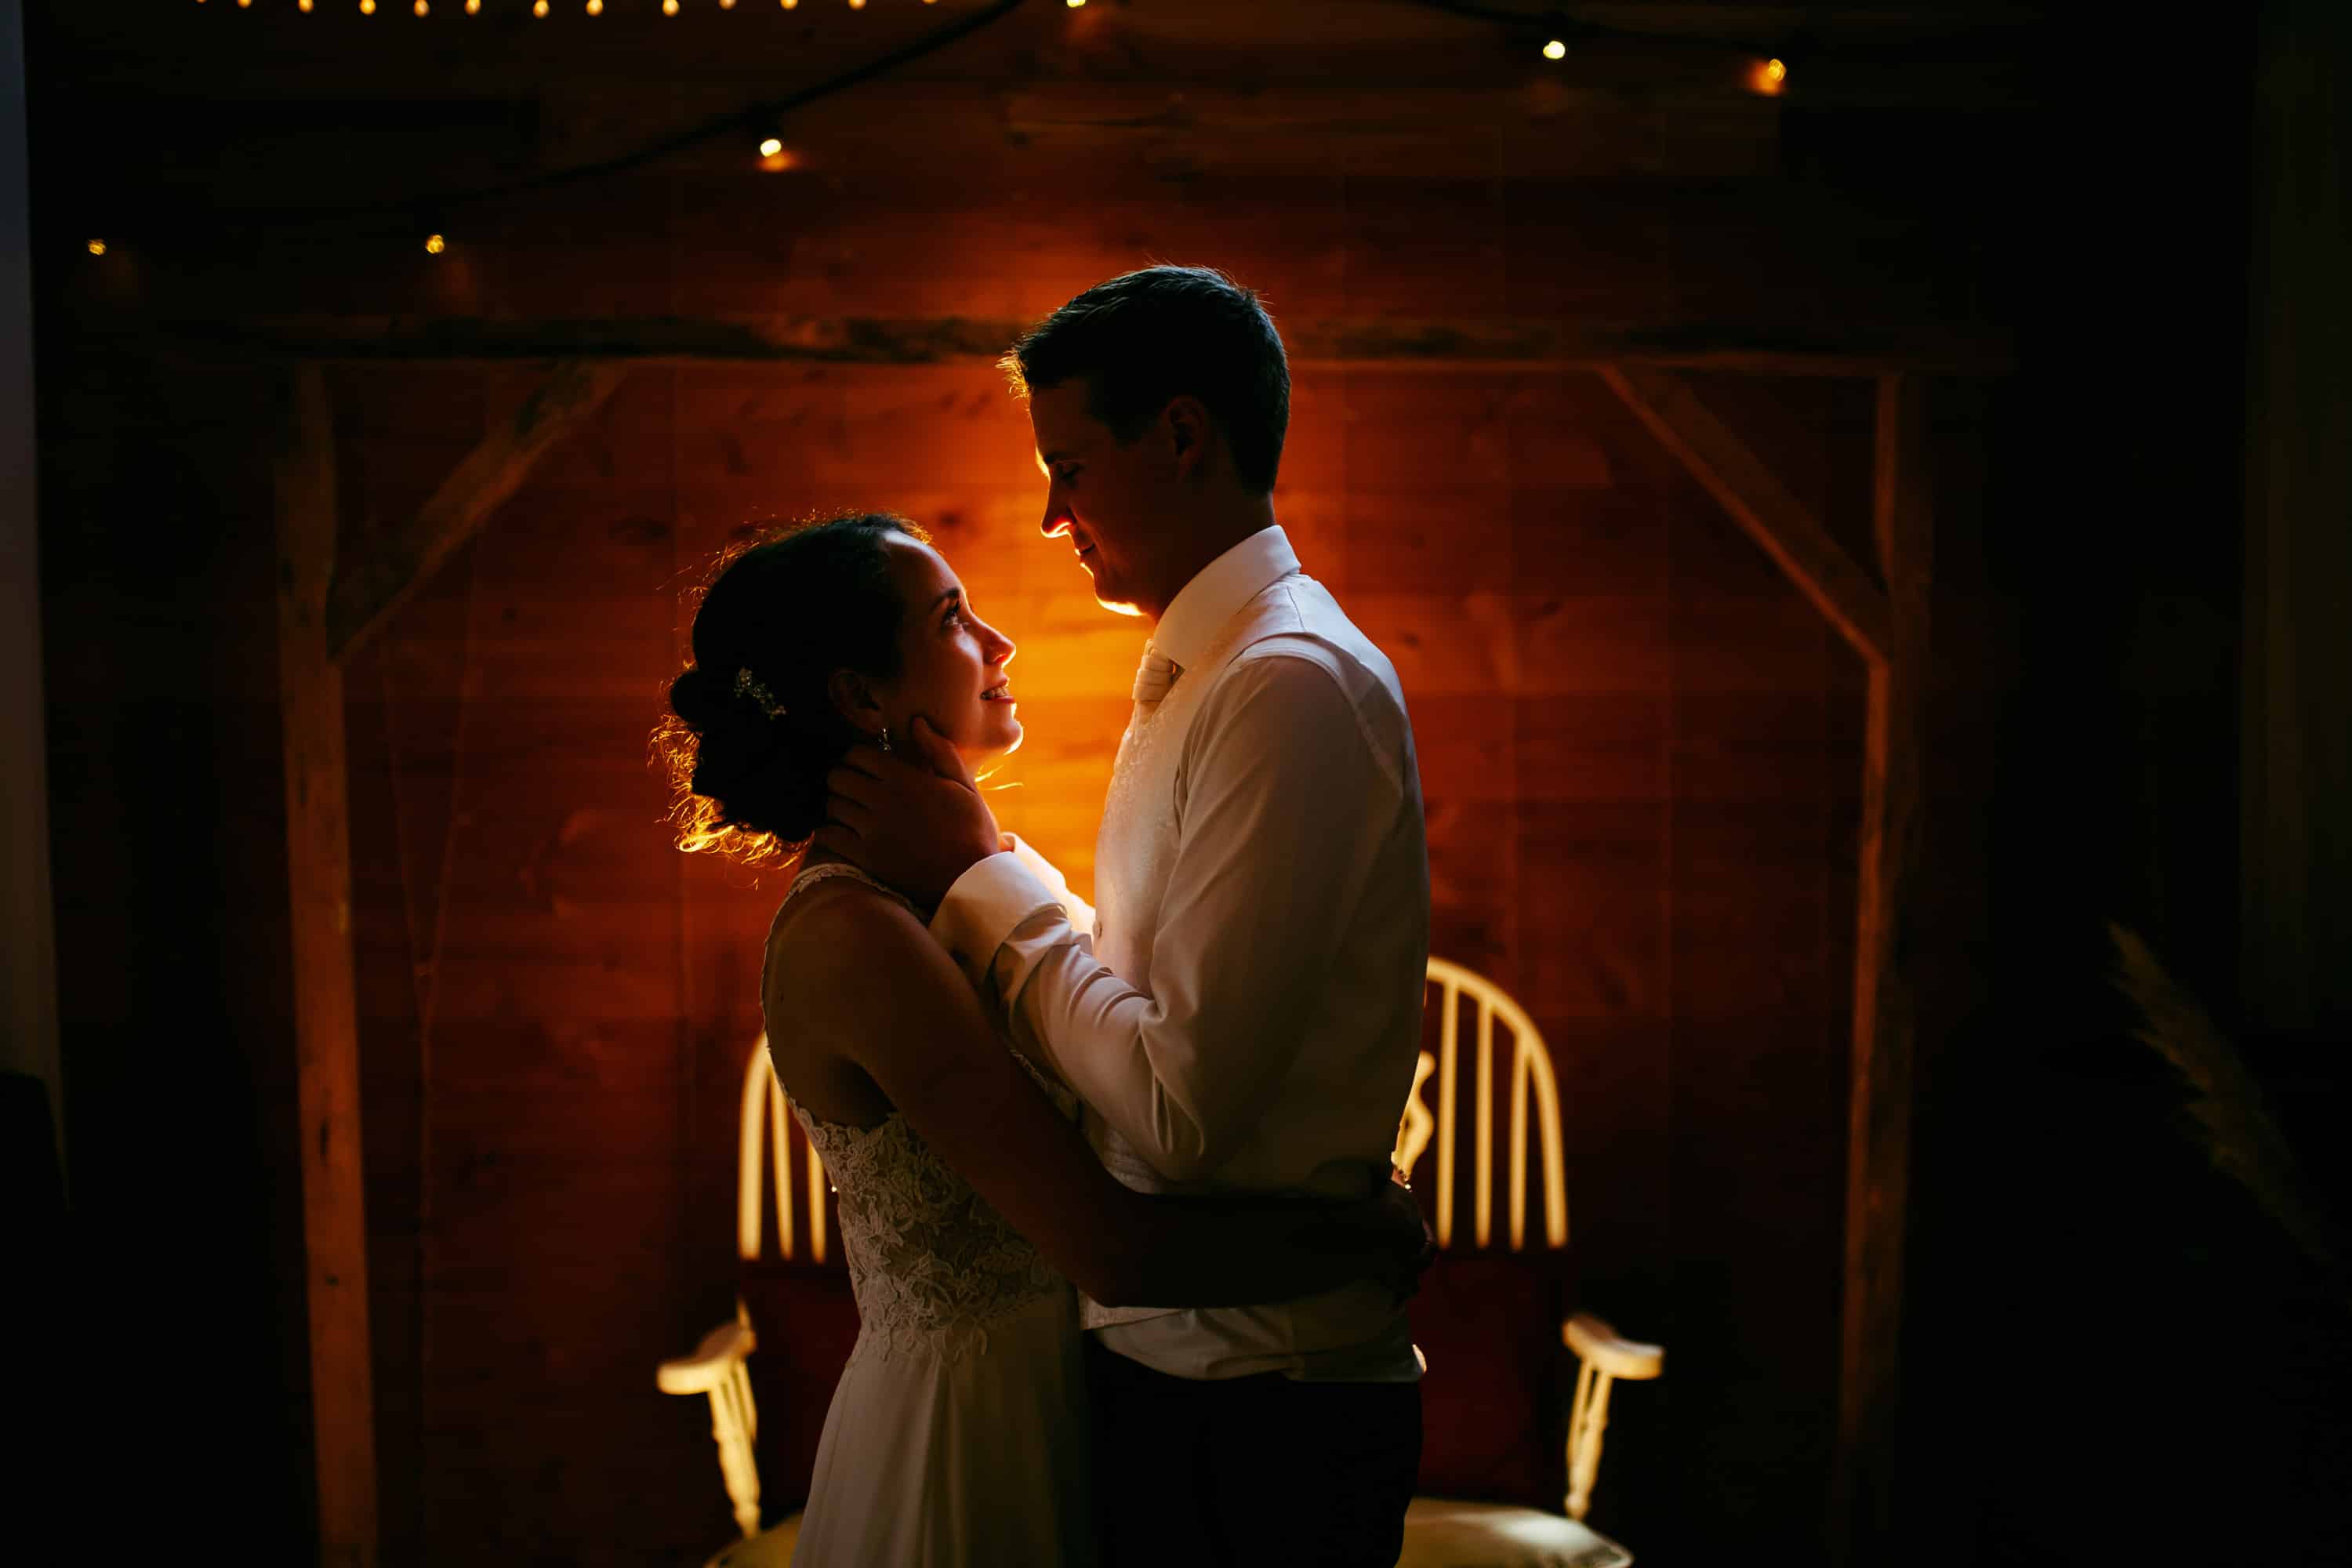 A bride and groom embrace in front of a wooden chair.